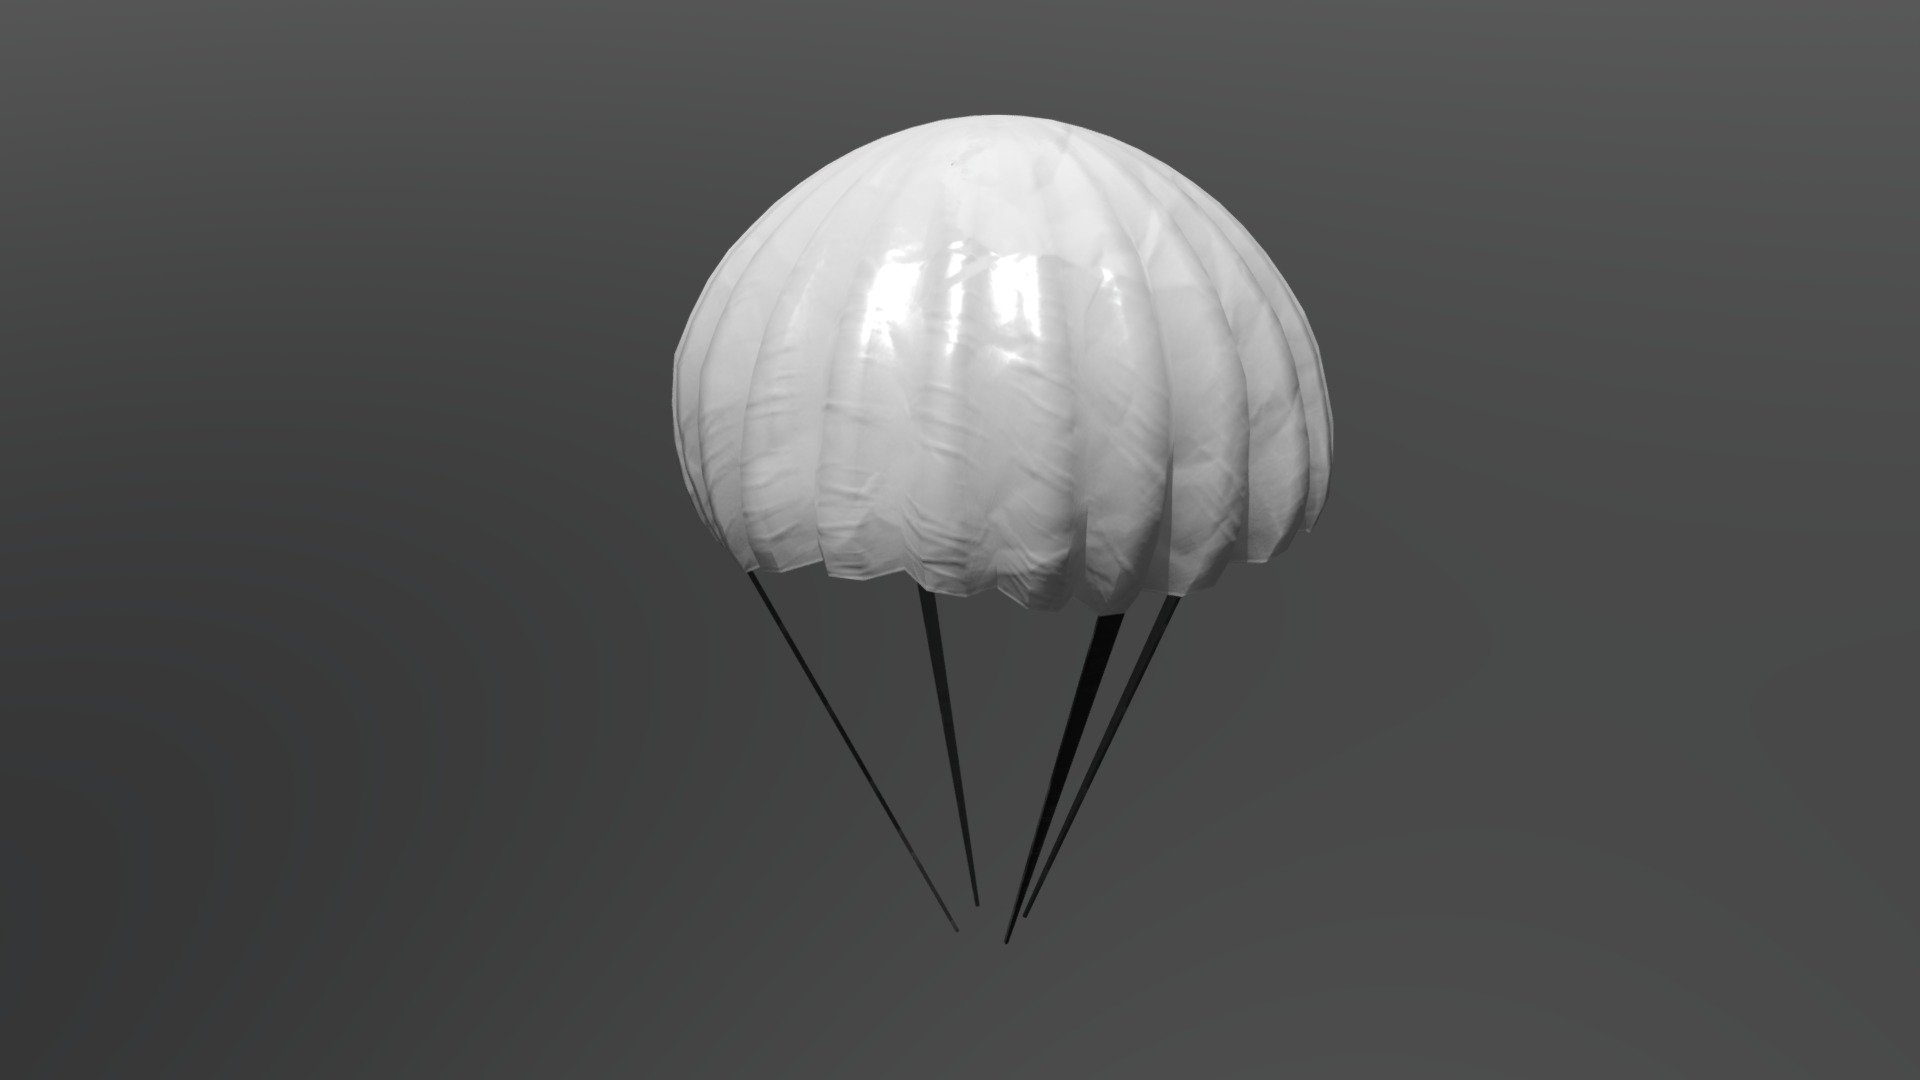 Parachute asset I made in a collabarative project 3d model